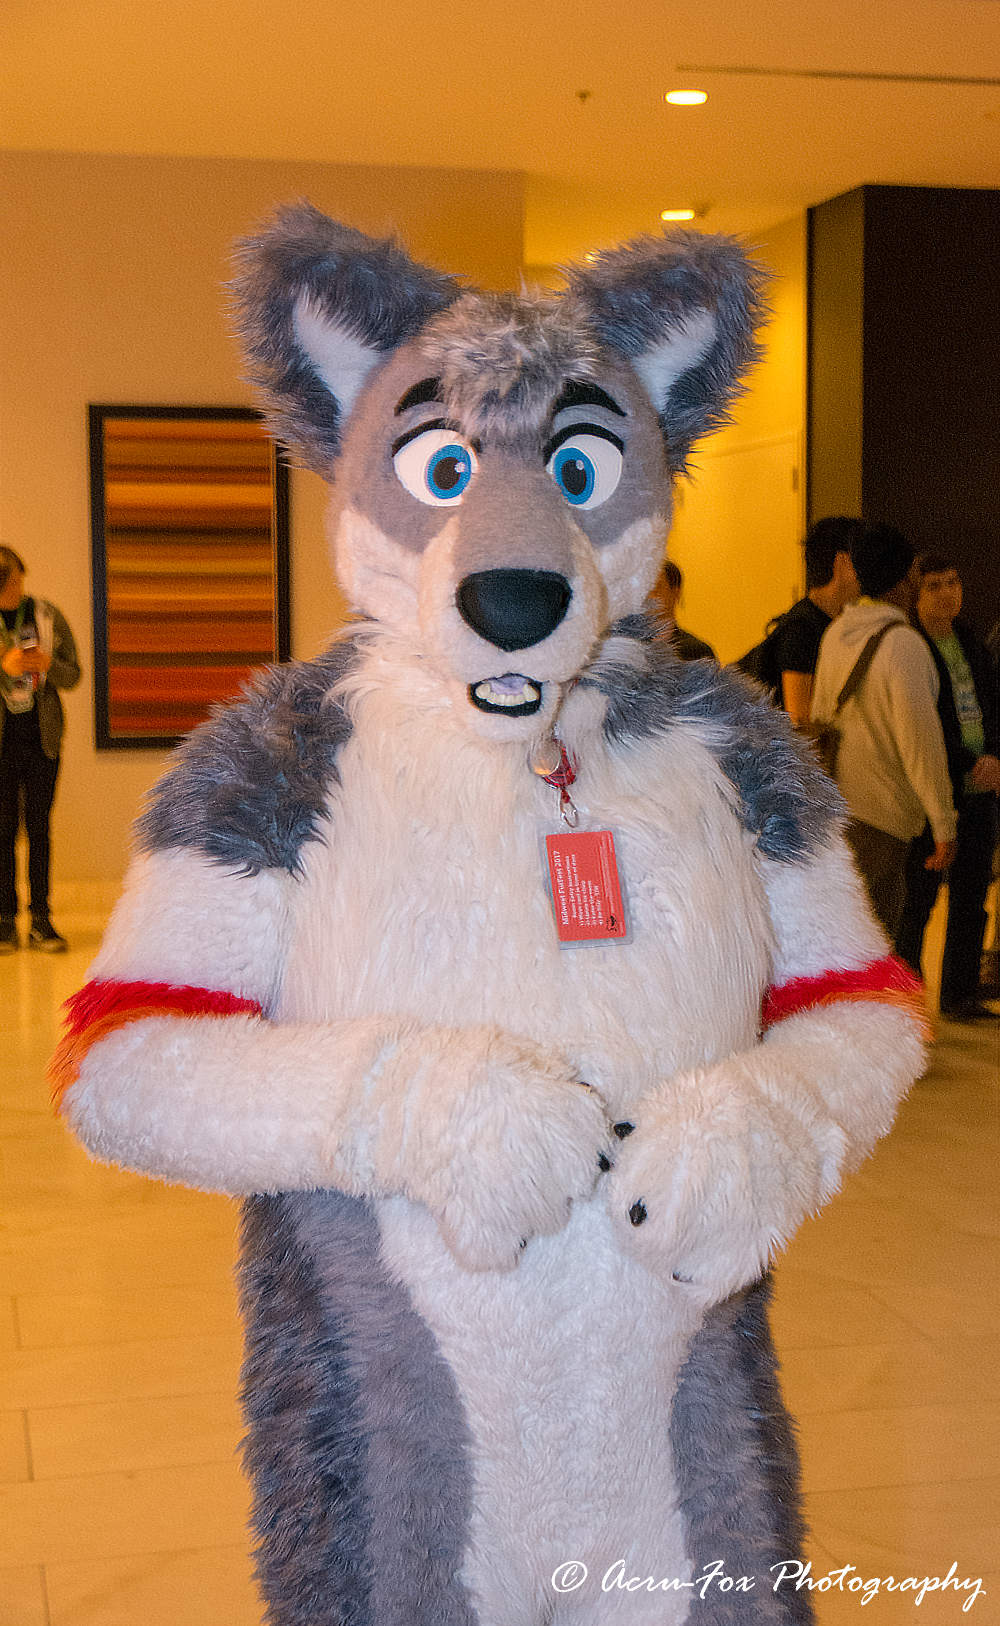 Photo taken by Acrufox. Copyright (C) 2017 Wolferajd & Acrufox. All rights reserved.